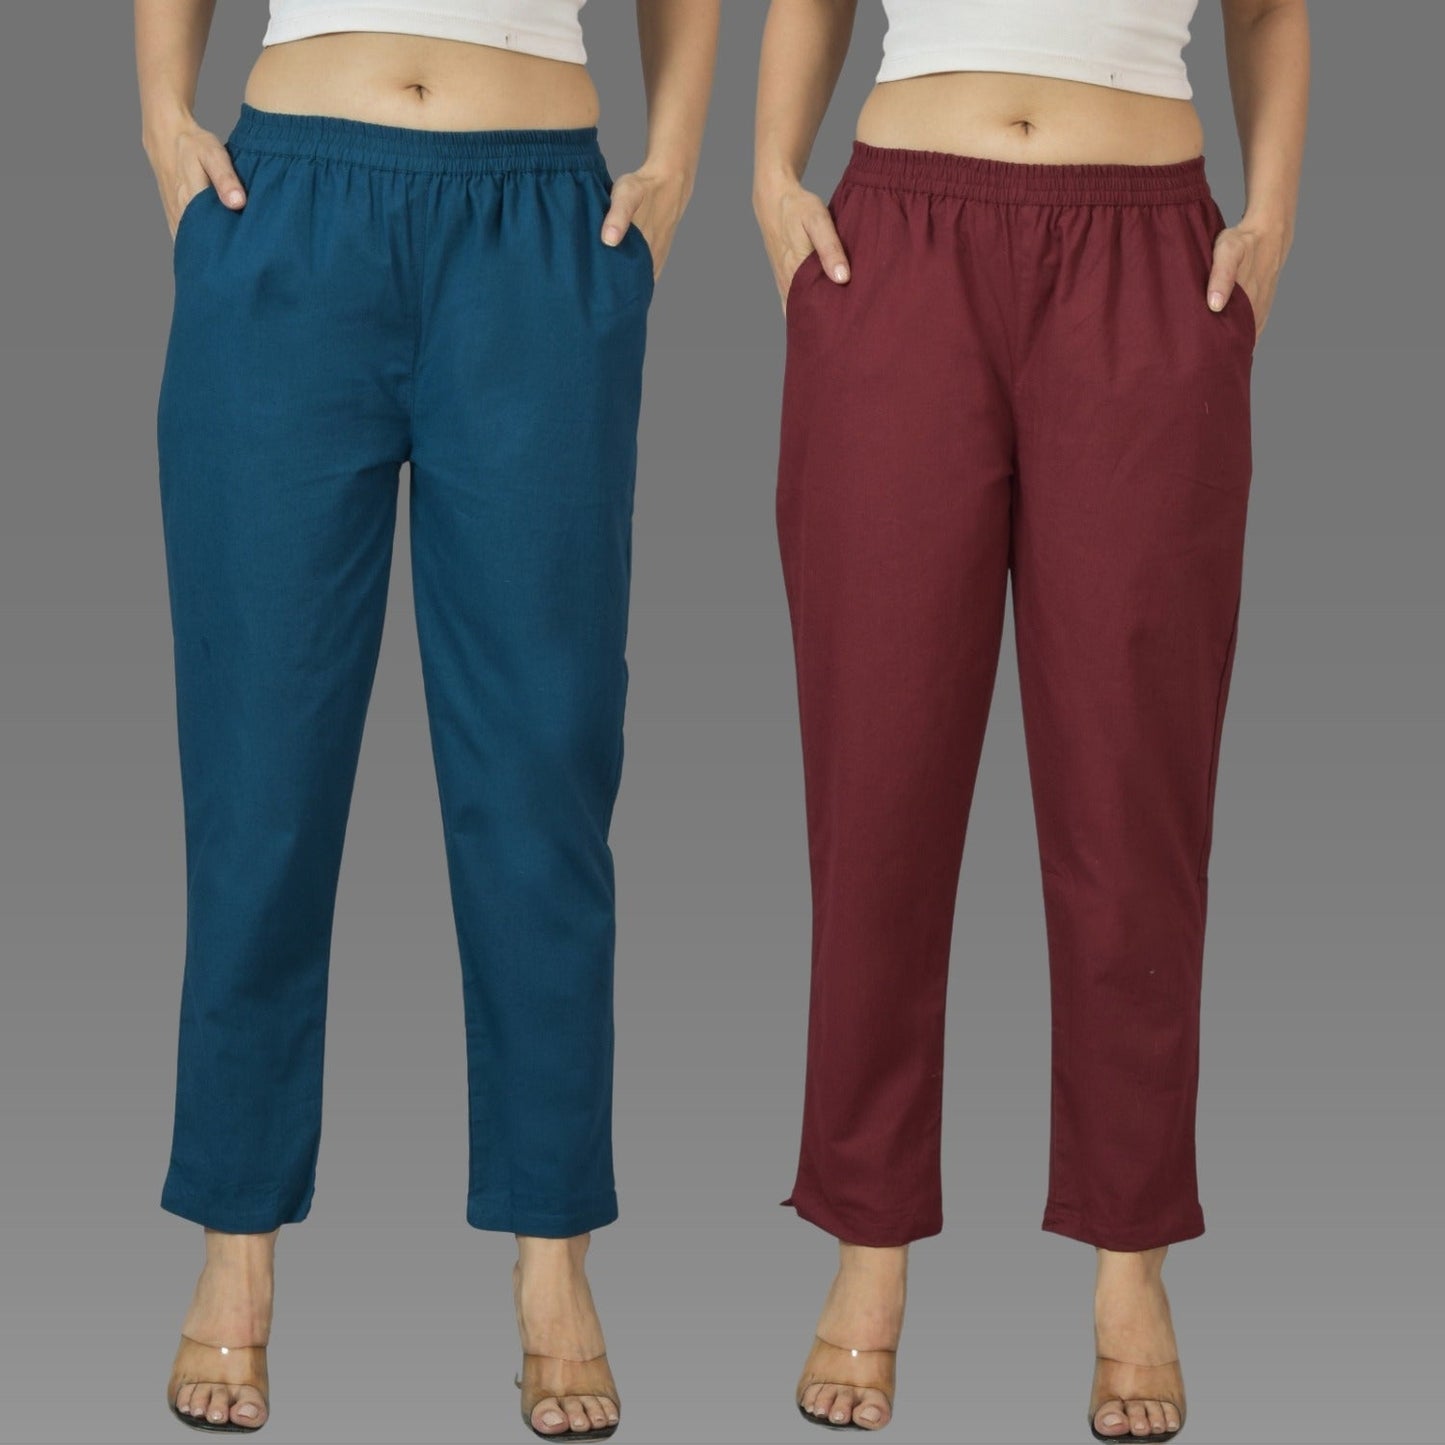 Pack Of 2 Womens Teal Blue And Wine Deep Pocket Fully Elastic Cotton Trouser